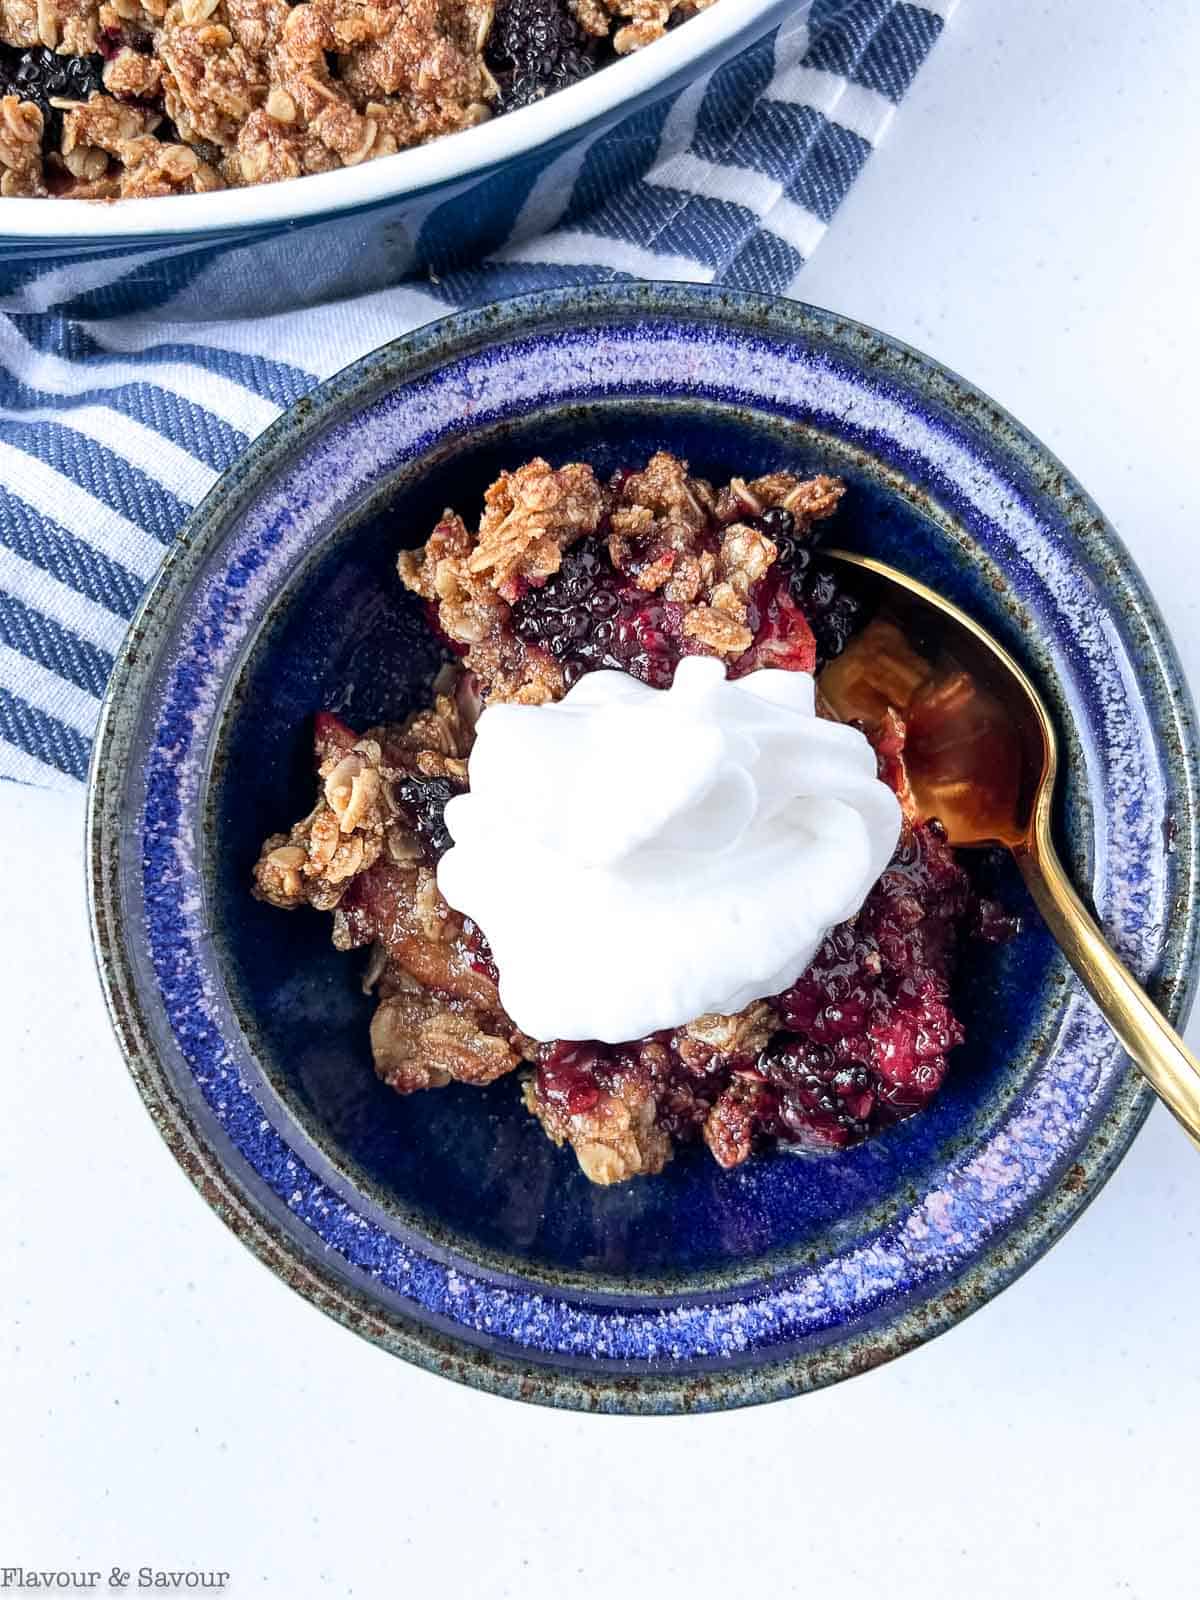 Overhead view of a bowl of apple blackberry crumble with ice cream.